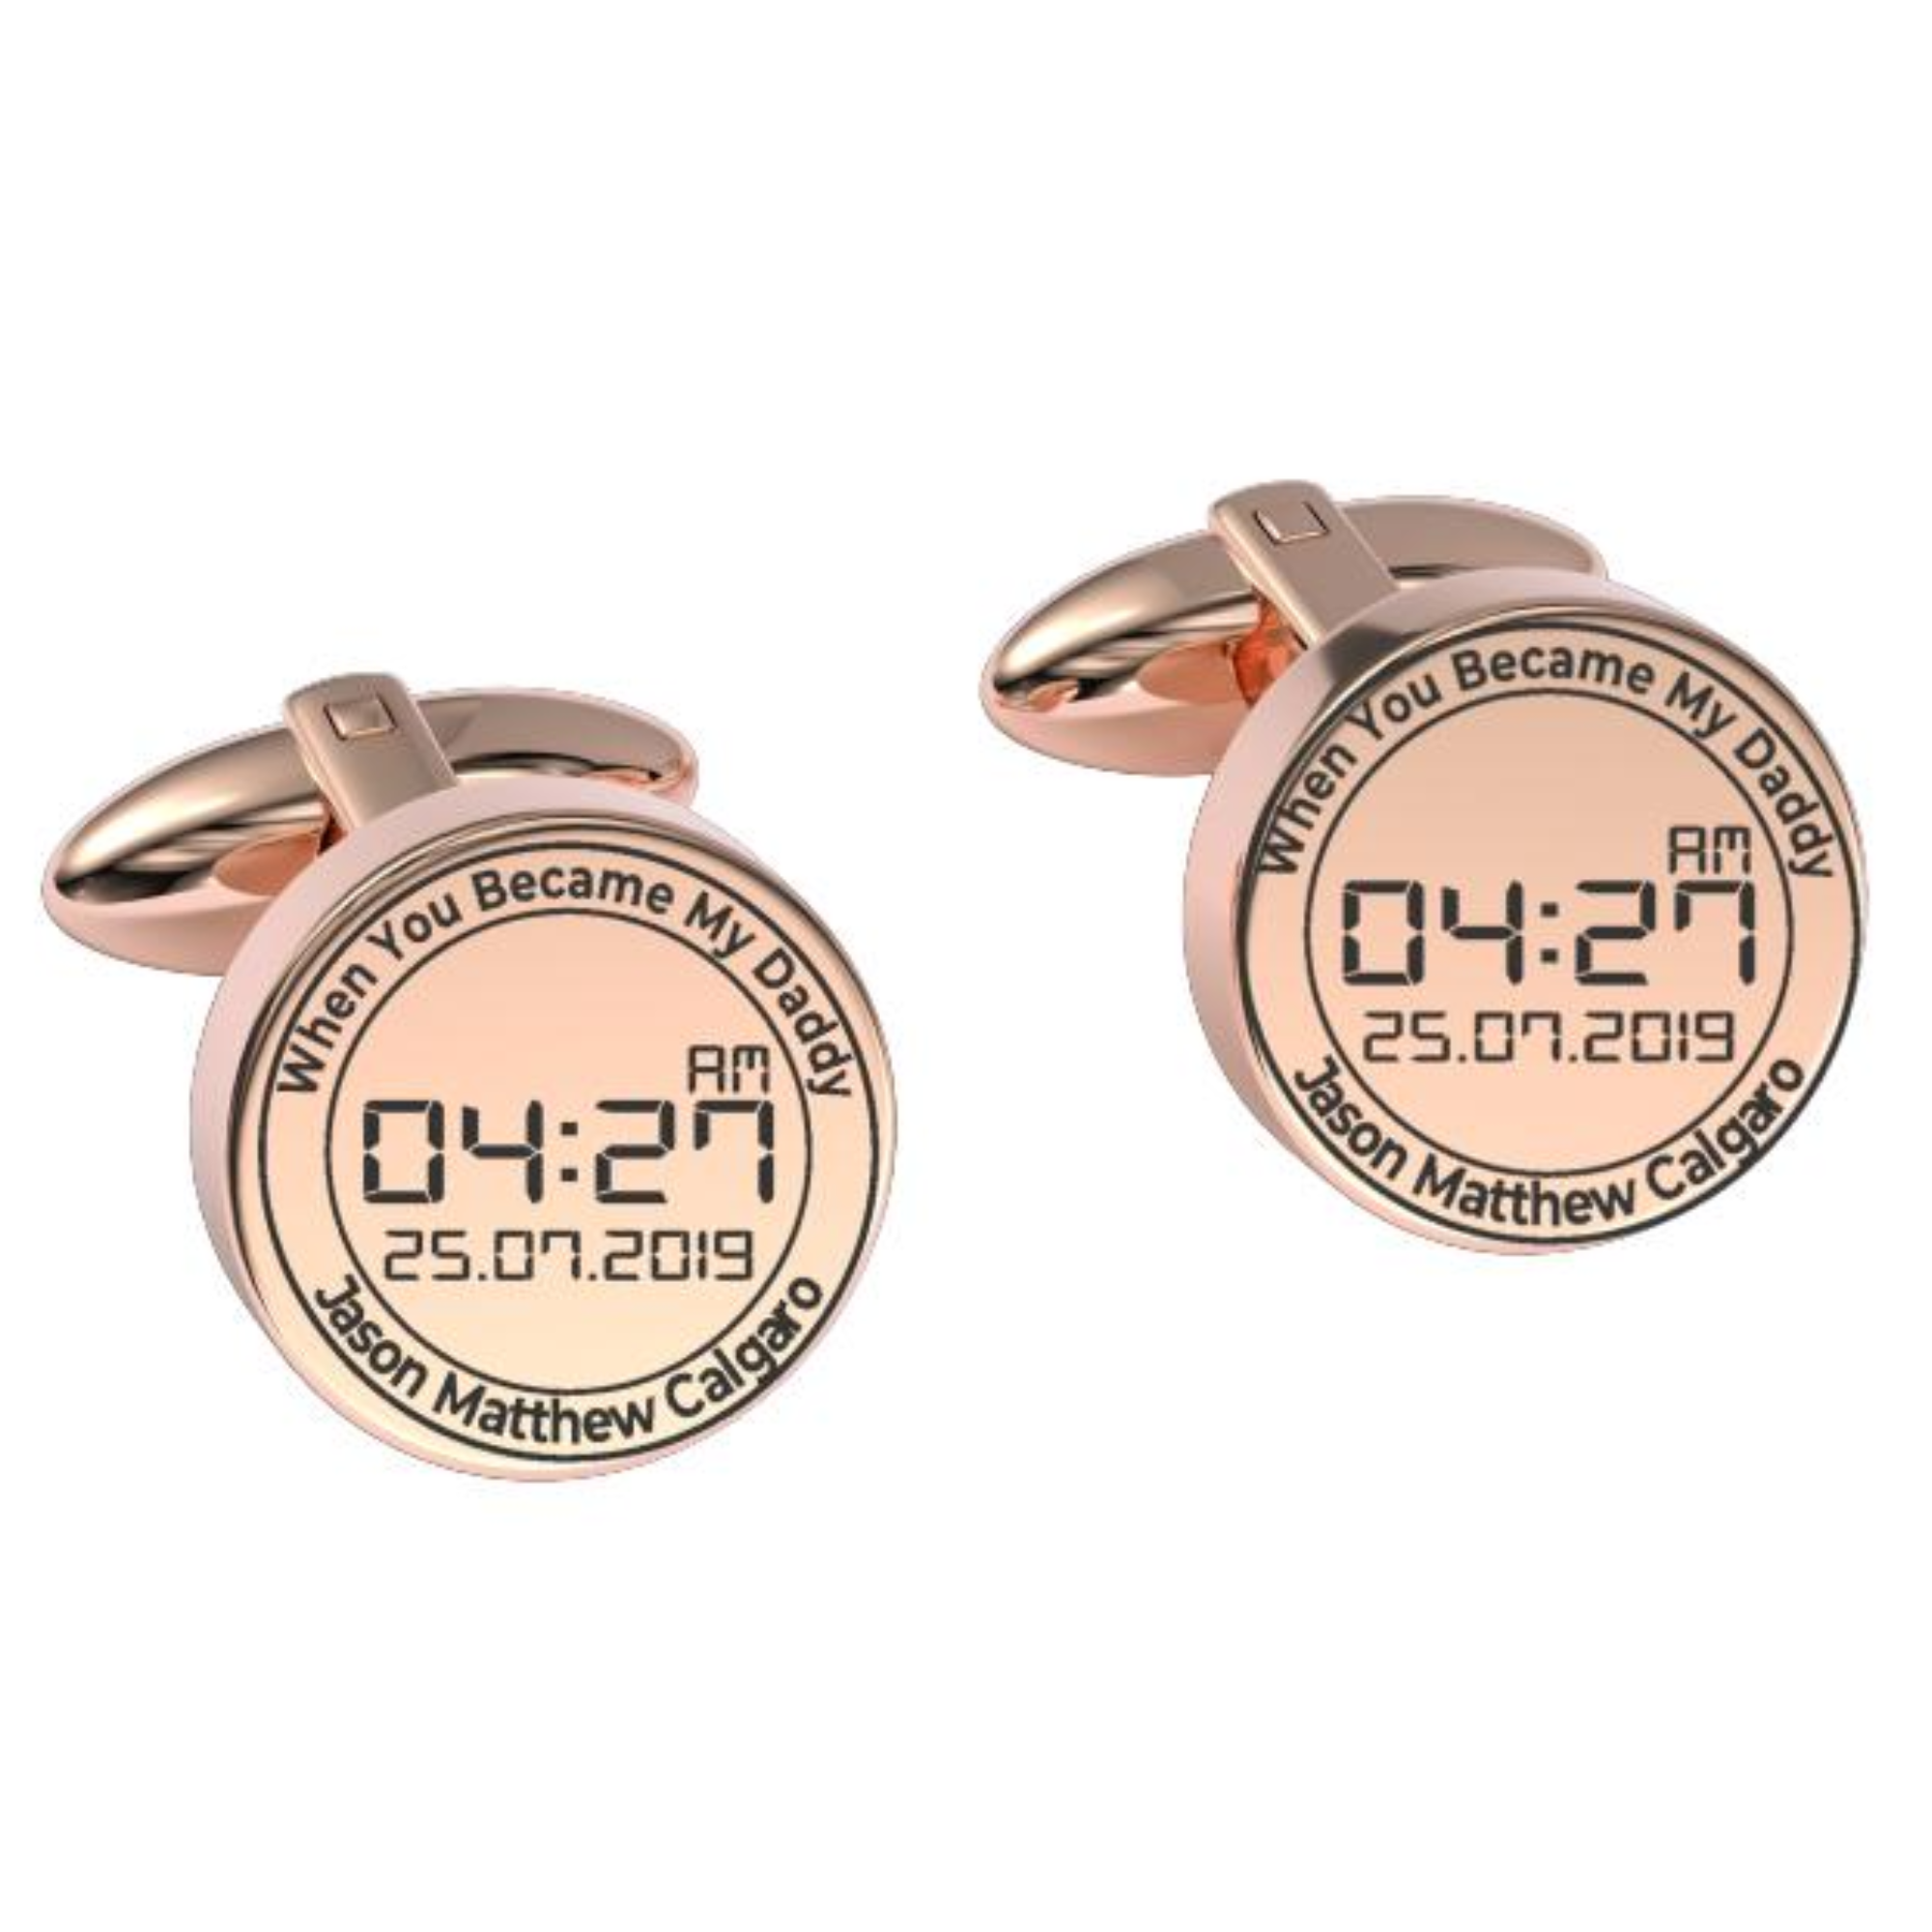 When You Became My Daddy Engraved Cufflinks in Rose Gold